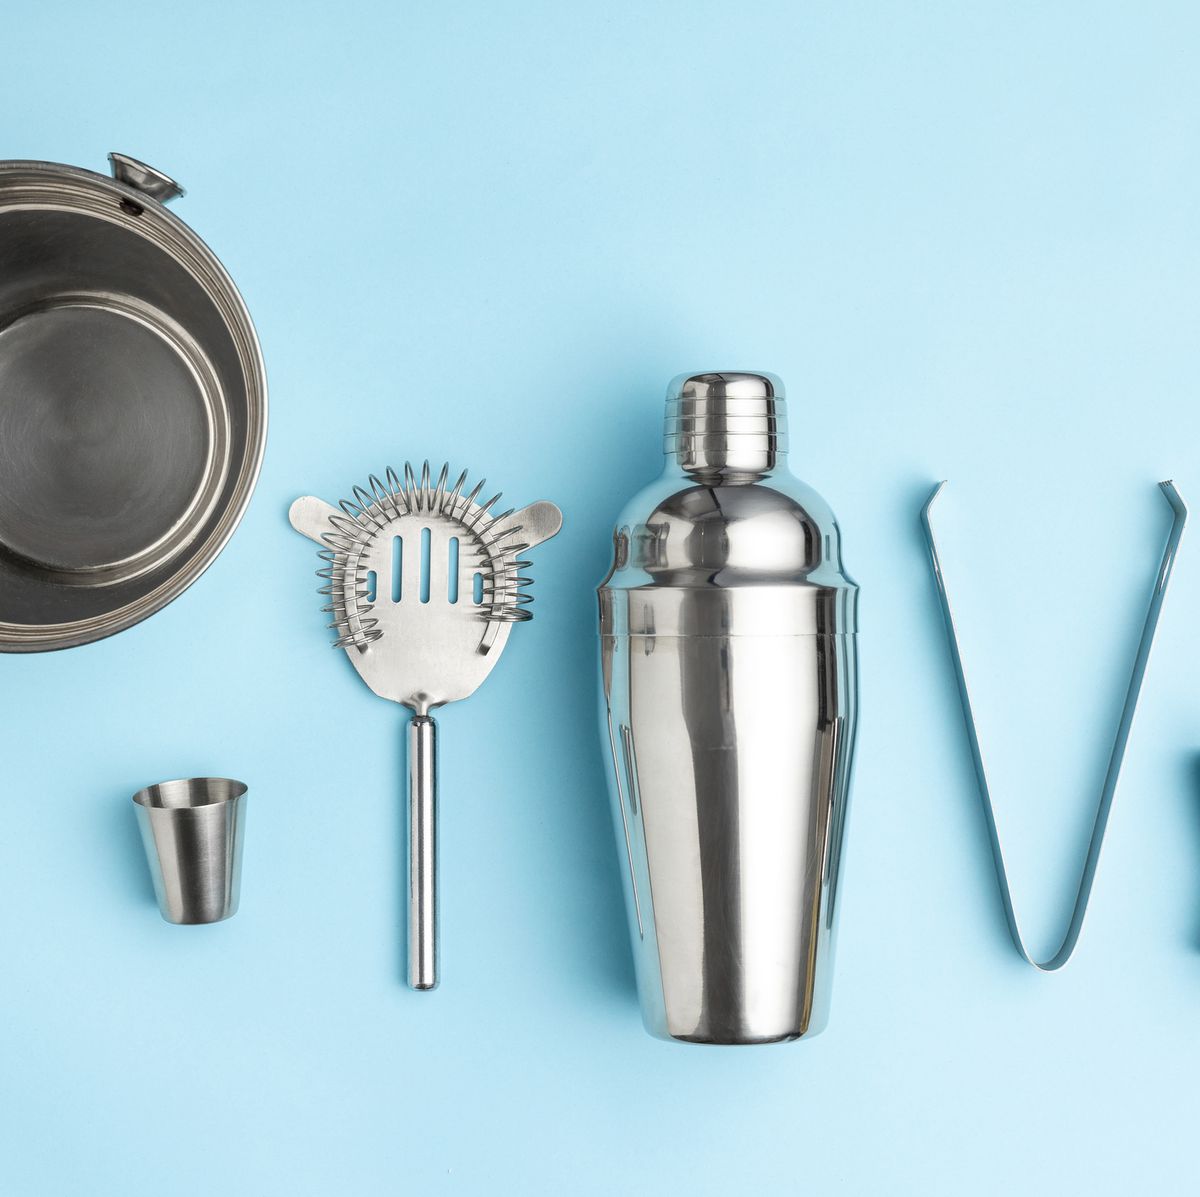 Enjoy Campsite Mixed Drinks with This Yeti Cocktail Shaker